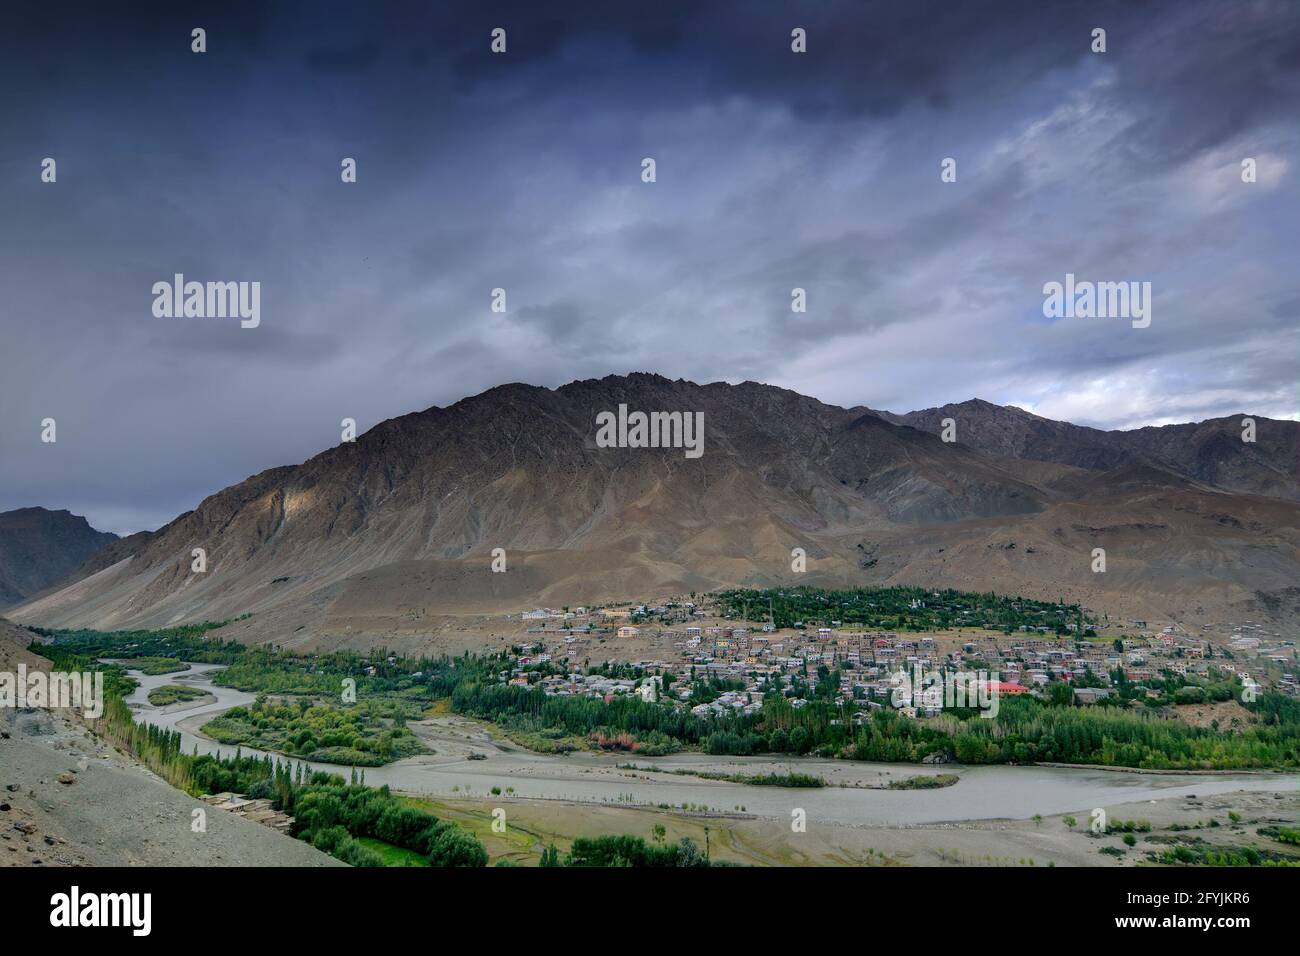 Top view of Indus river and Kargil City valley with Himalayan mountains and blue cloudy sky in background, Leh, Ladakh, Jammu and Kashmir, India Stock Photo